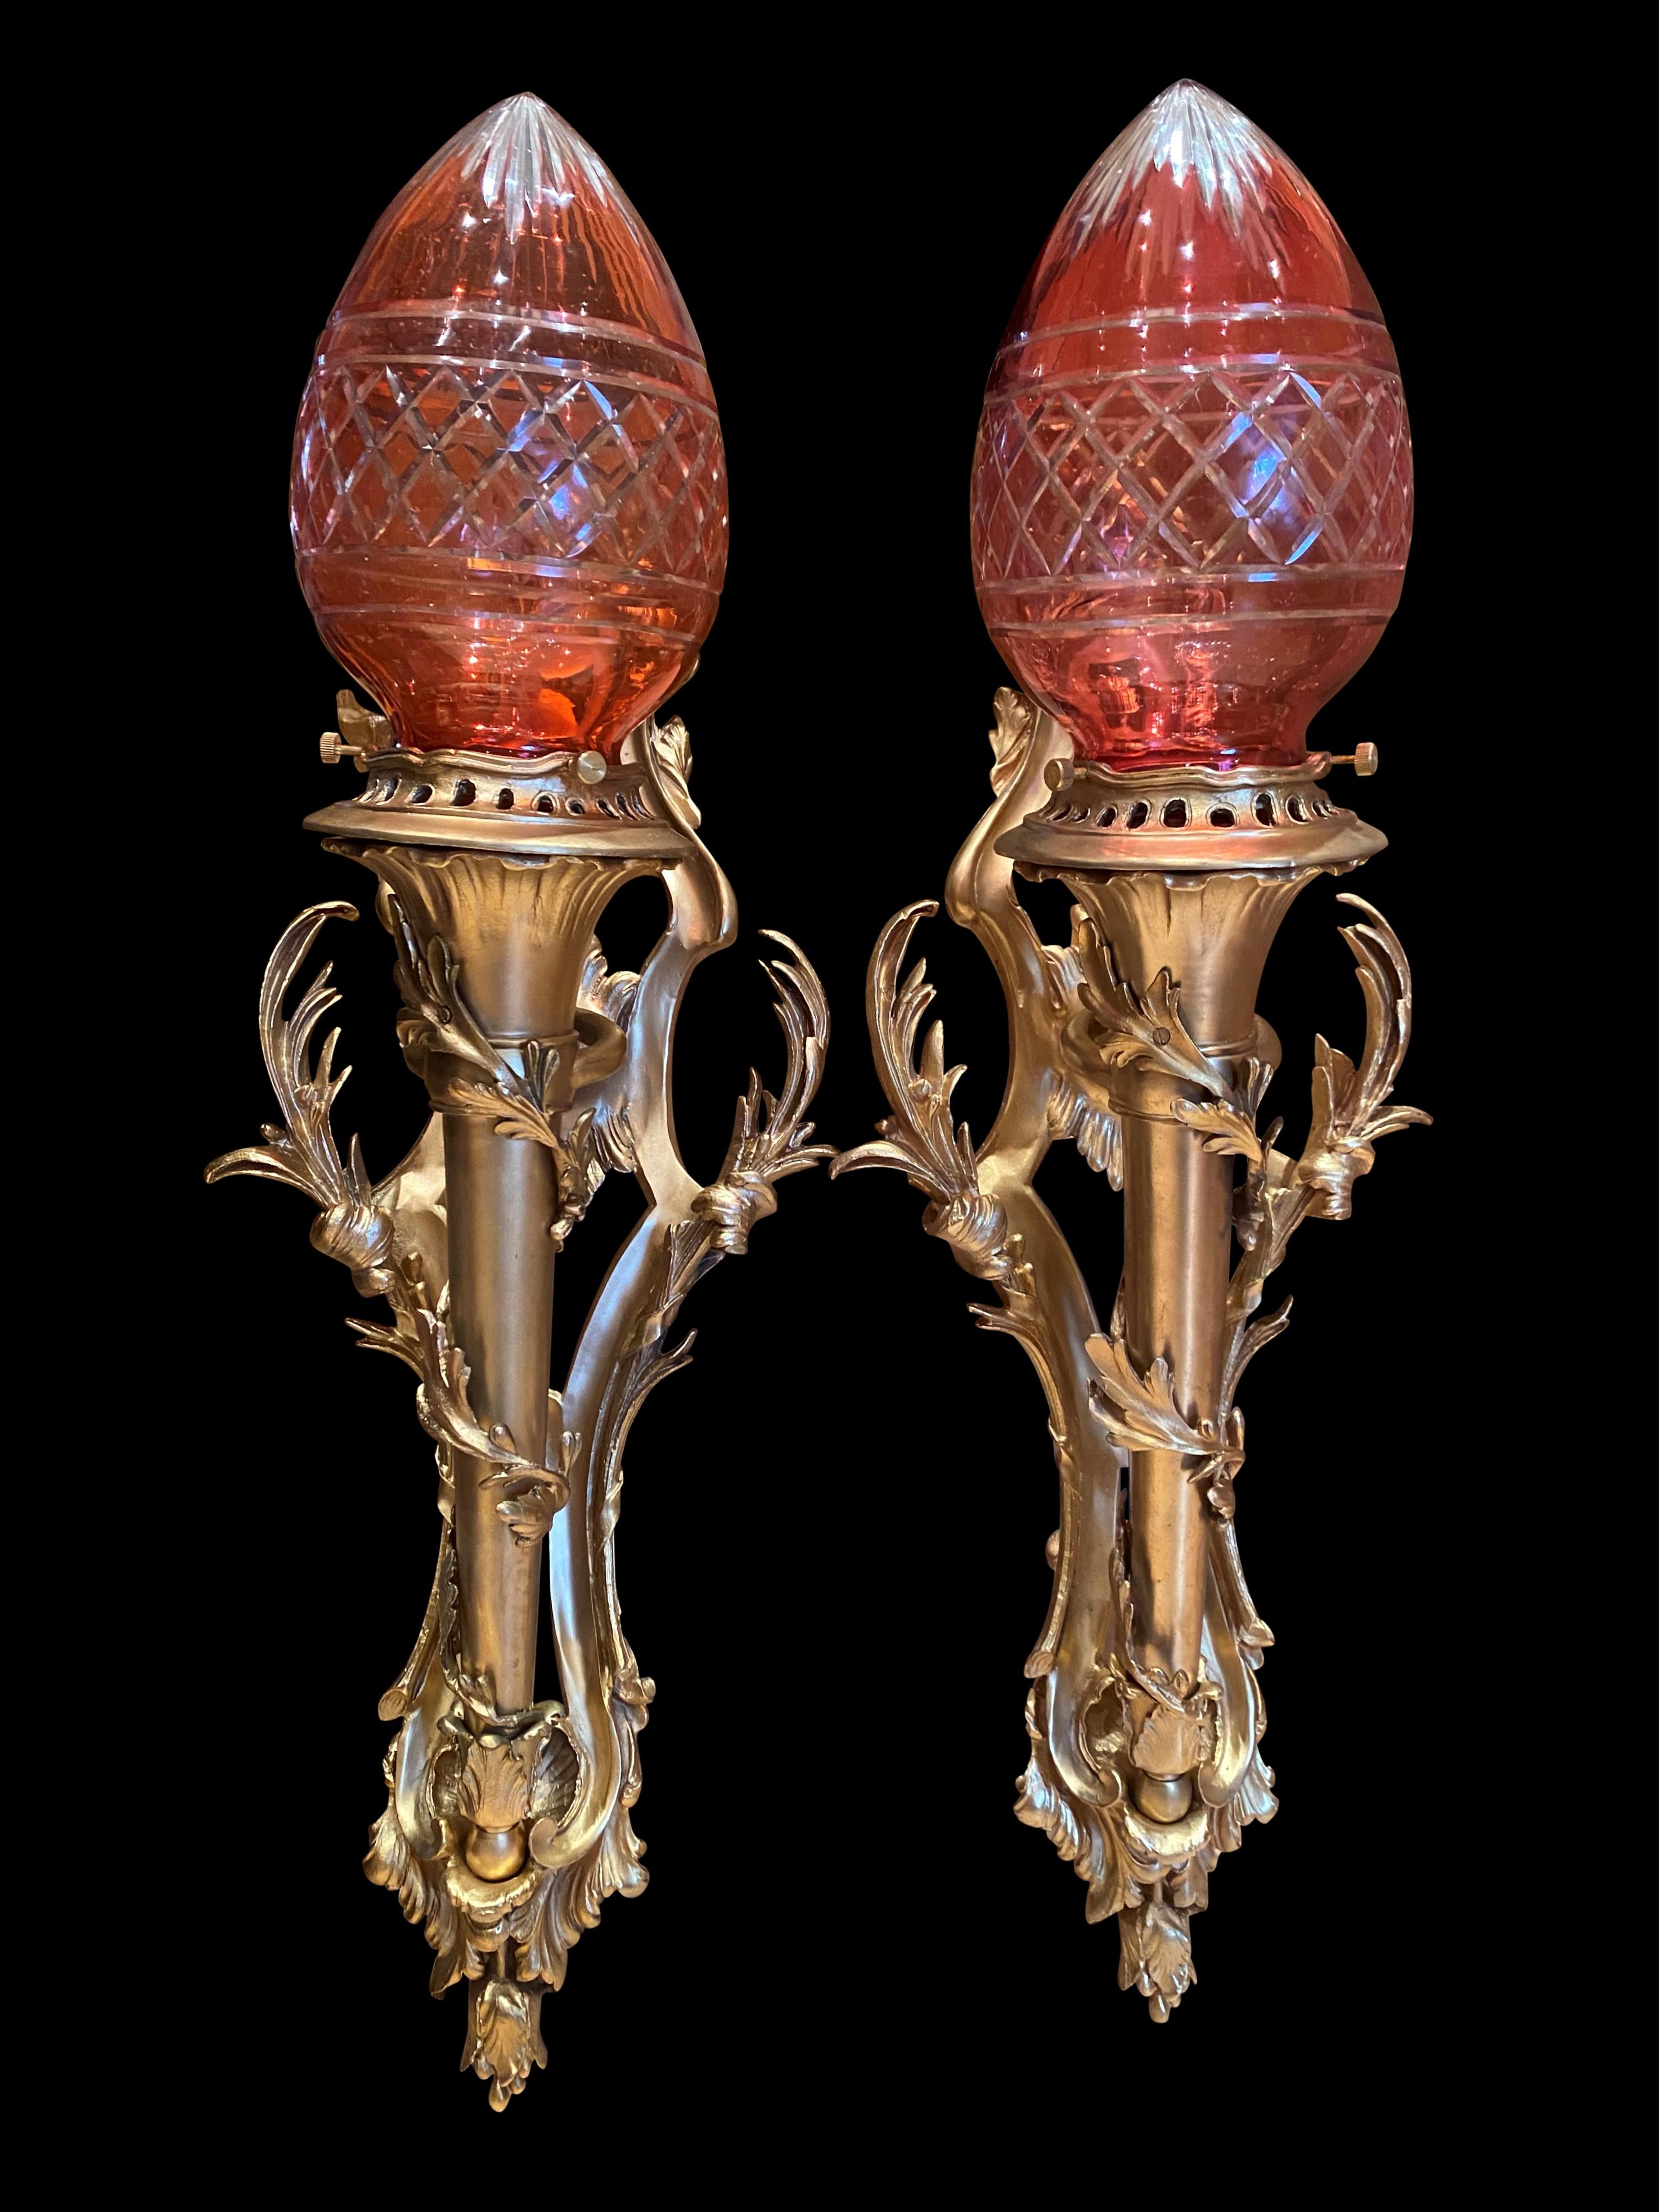 A pair of French Empire Statue of Liberty wall sconces, 20th century. Beautifully intwined foliage running up central stem. Highly decorative with cut crystal ruby colored shades.